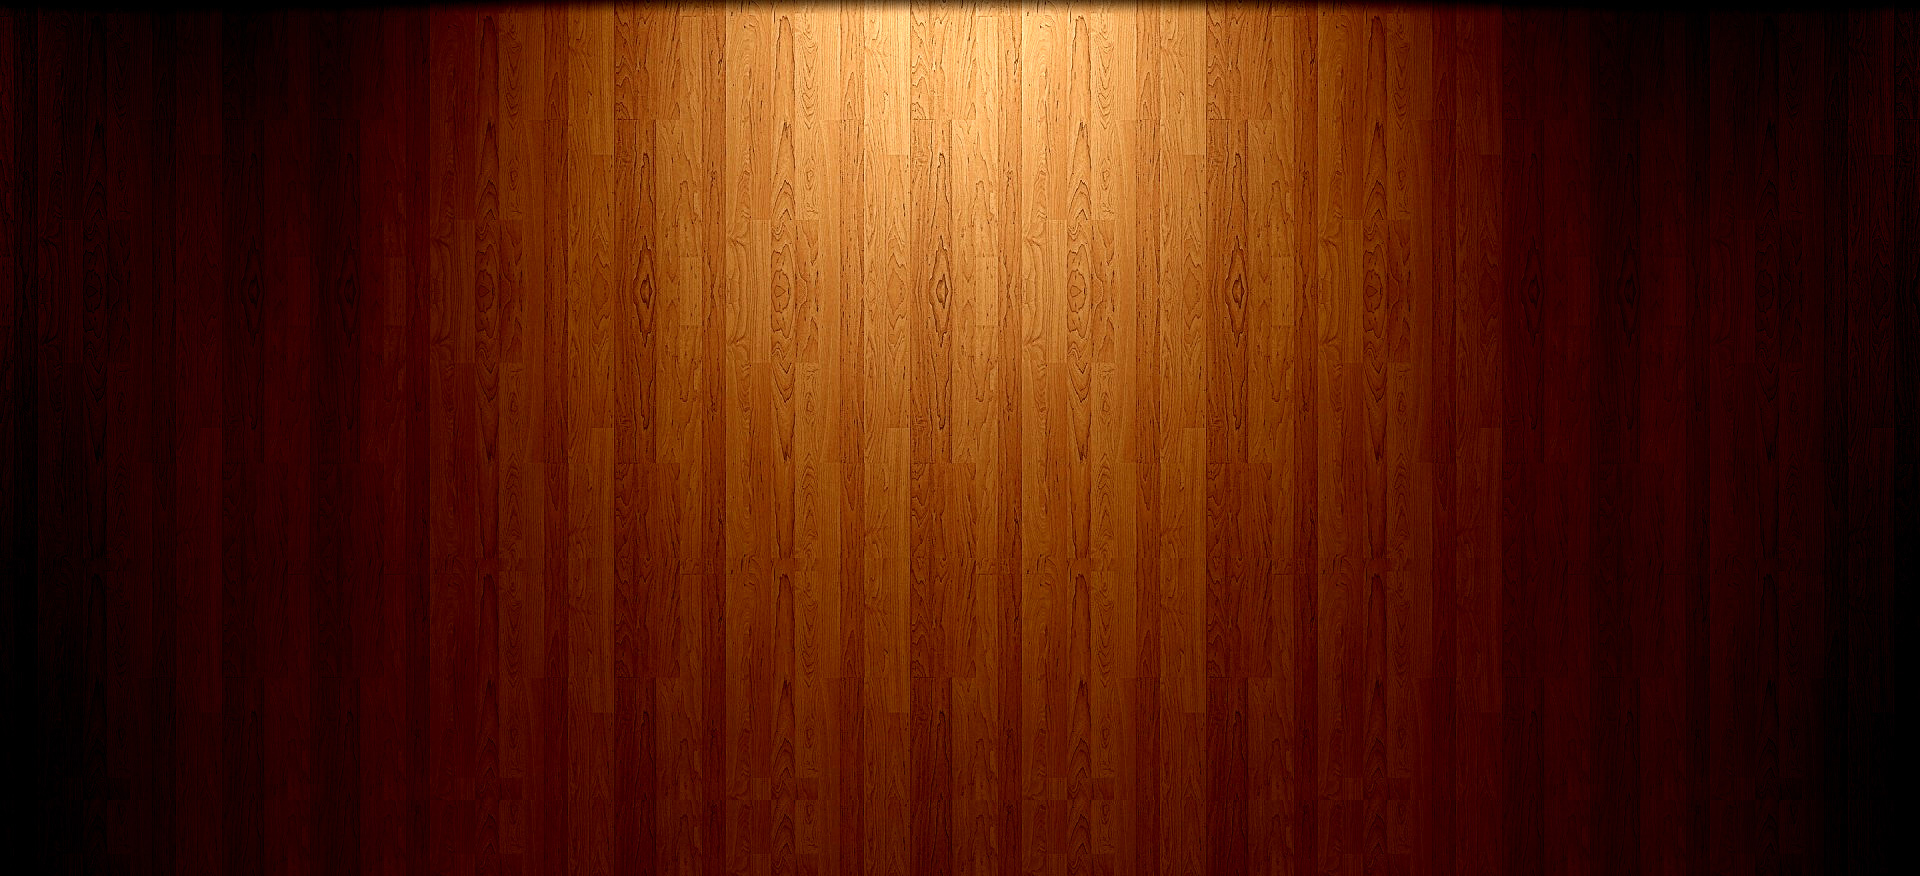 Garages In Southern Maryland Wood Panel Background Image